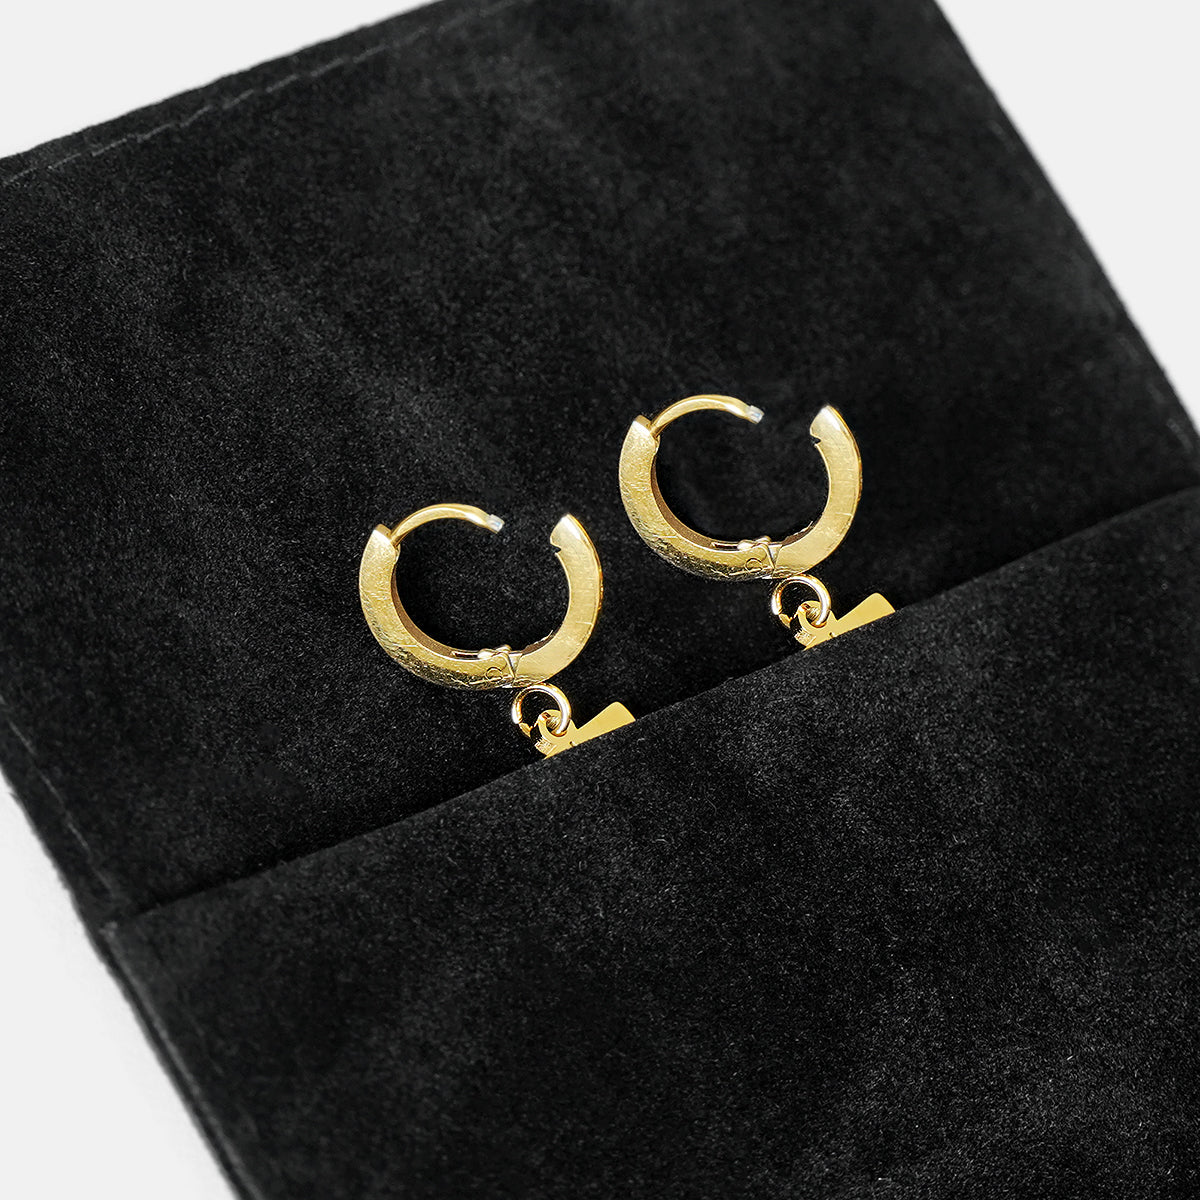 54 Number Earring - Gold Plated Stainless Steel